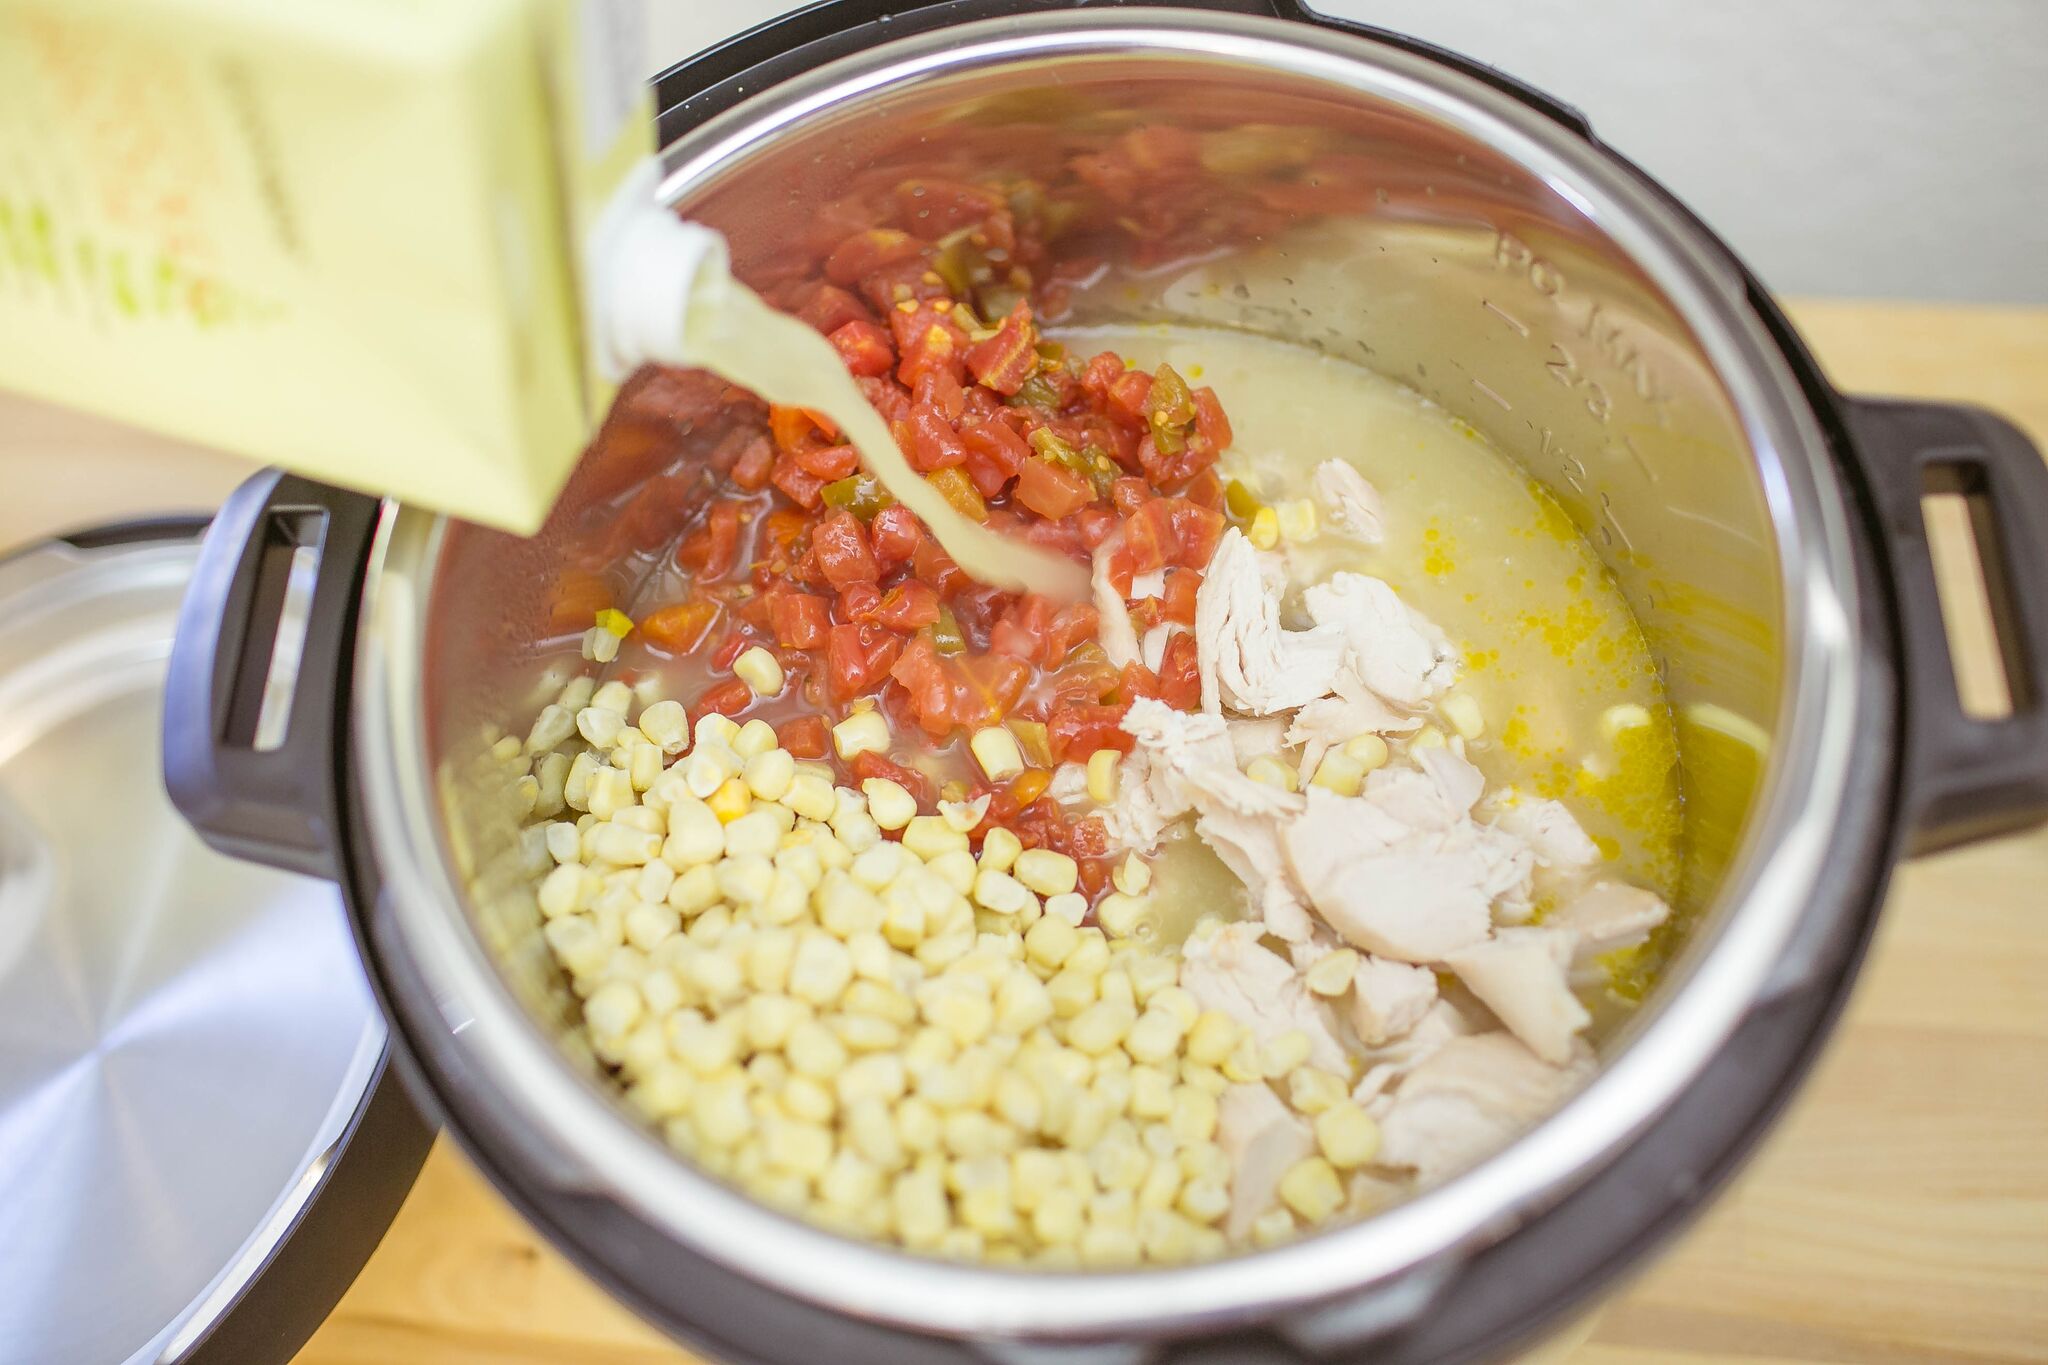 Add shredded chicken, peppers and chicken broth into the instant pot